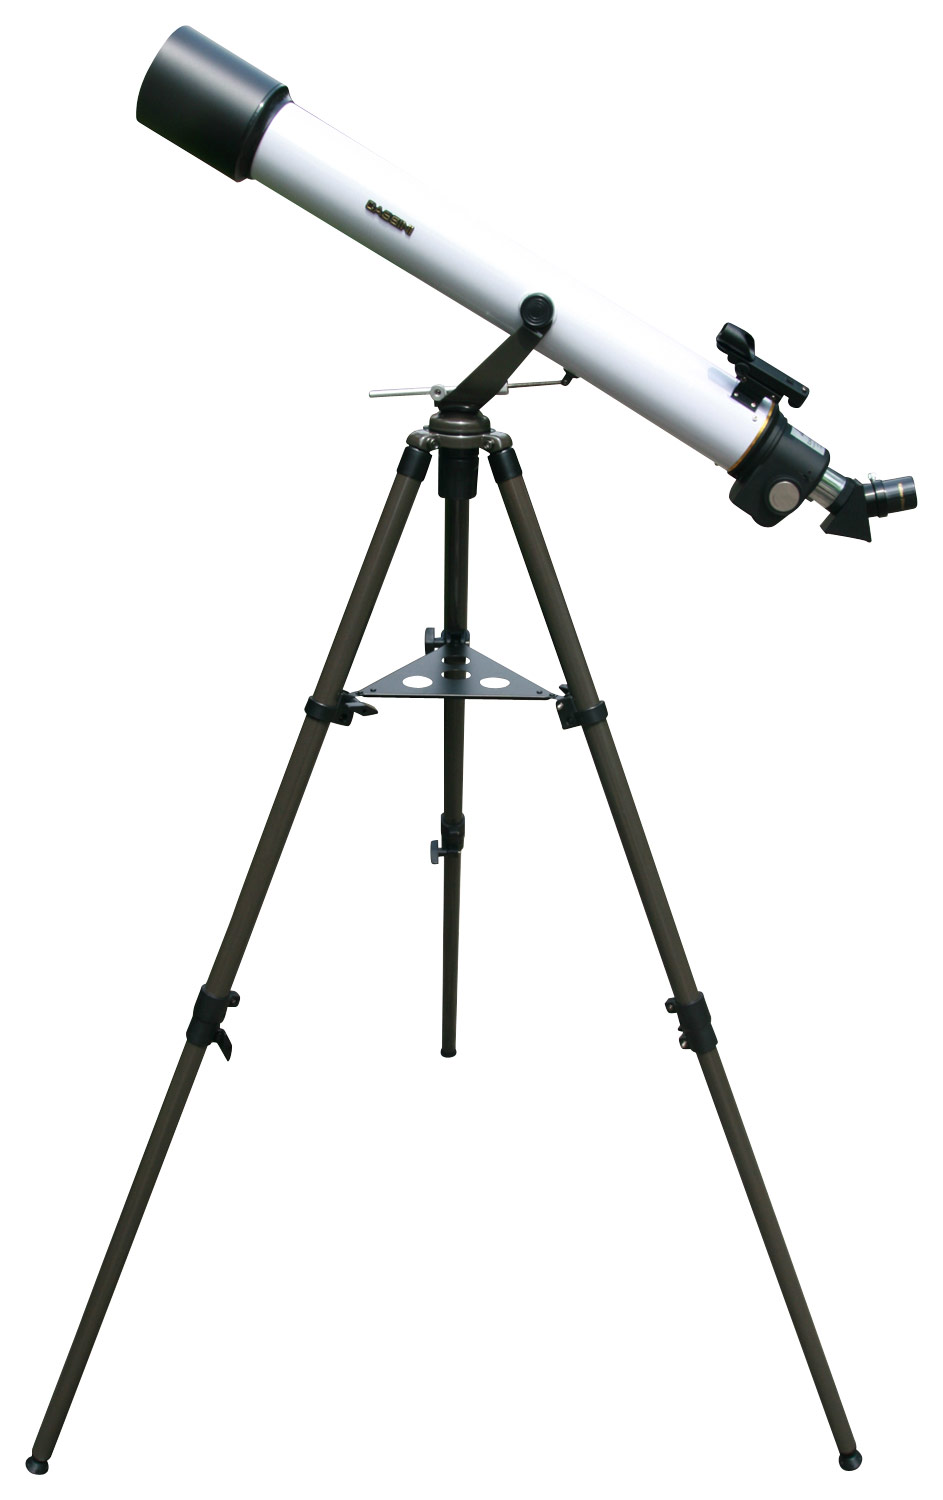 UPC 859773004070 product image for Cassini - 800mm Astro-Terrestrial Refractor Telescope with Electronic Remote Foc | upcitemdb.com